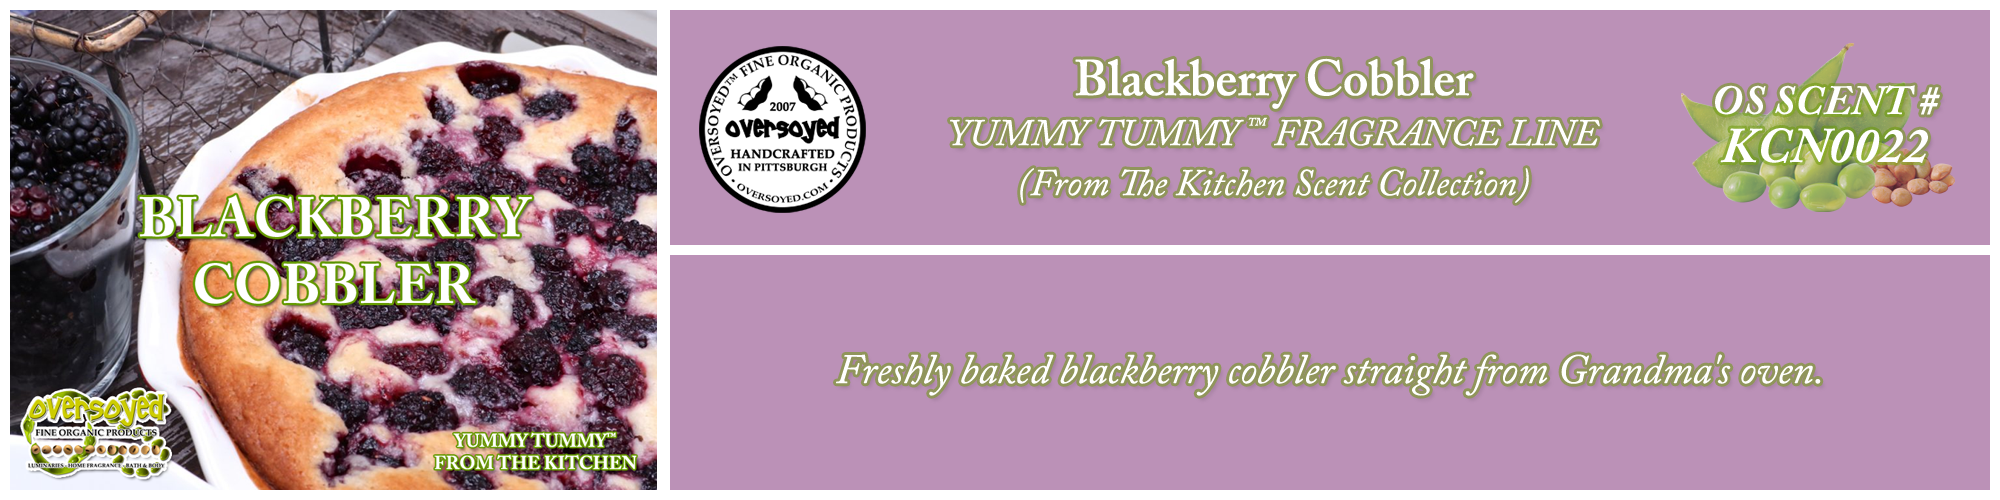 Blackberry Cobbler Handcrafted Products Collection